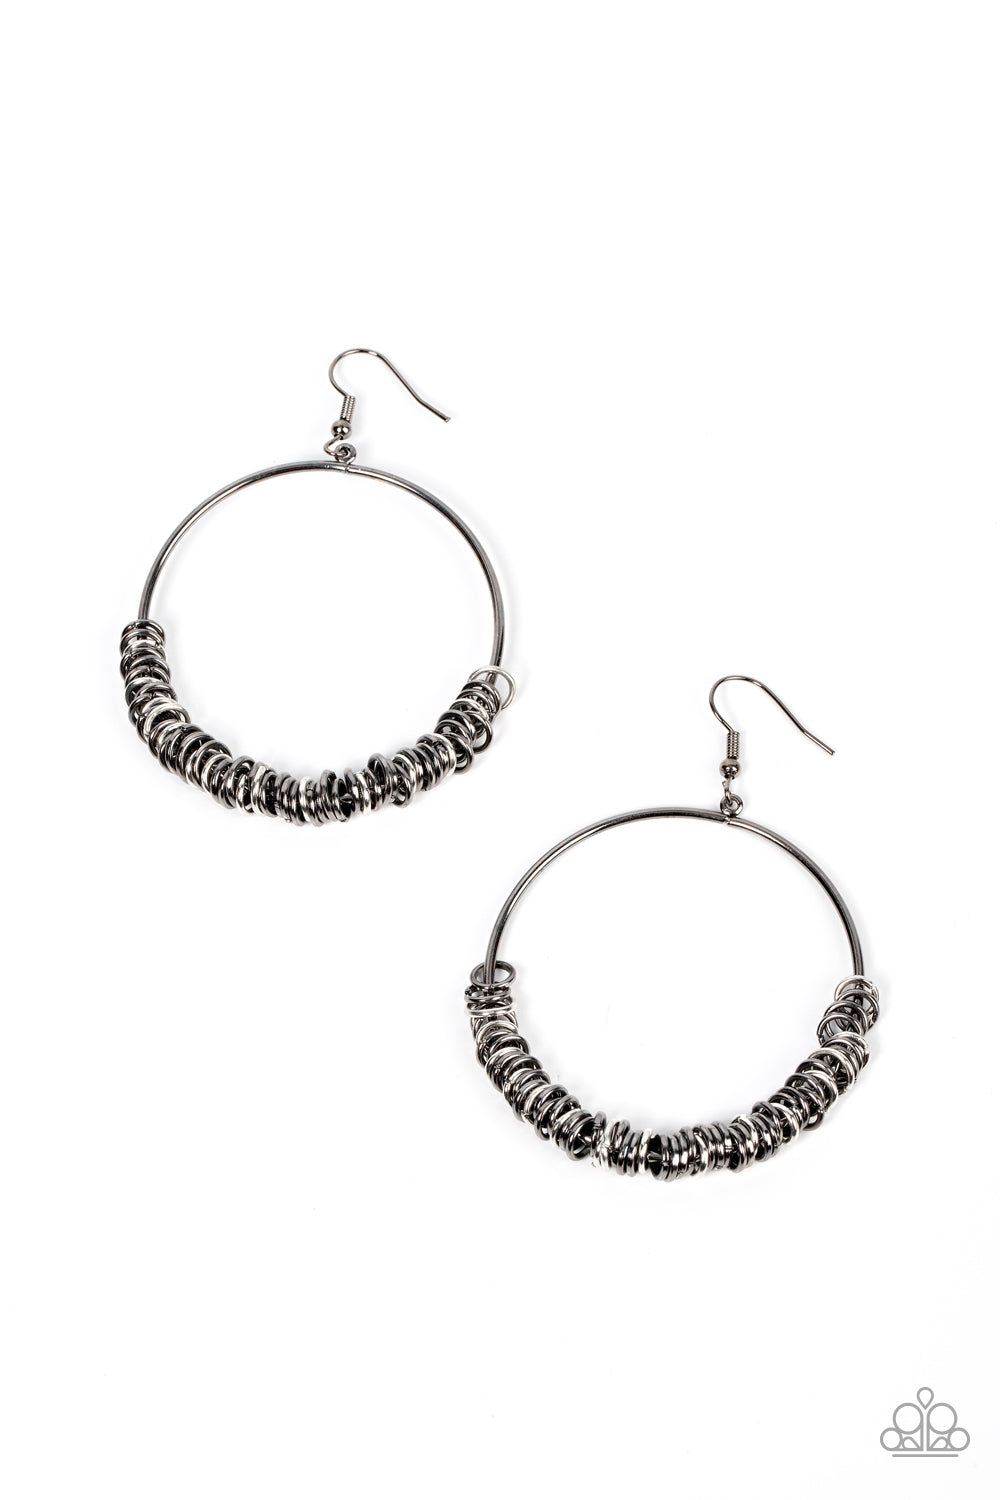 Retro Ringleader - Multi Item #P5IN-MTXX-031XX An abundance of miniature gunmetal and silver rings slide around a simple gunmetal front-facing hoop, resulting in a polished industrial vibe. Earring attaches to a standard fishhook fitting.  Sold as one pair of earrings.